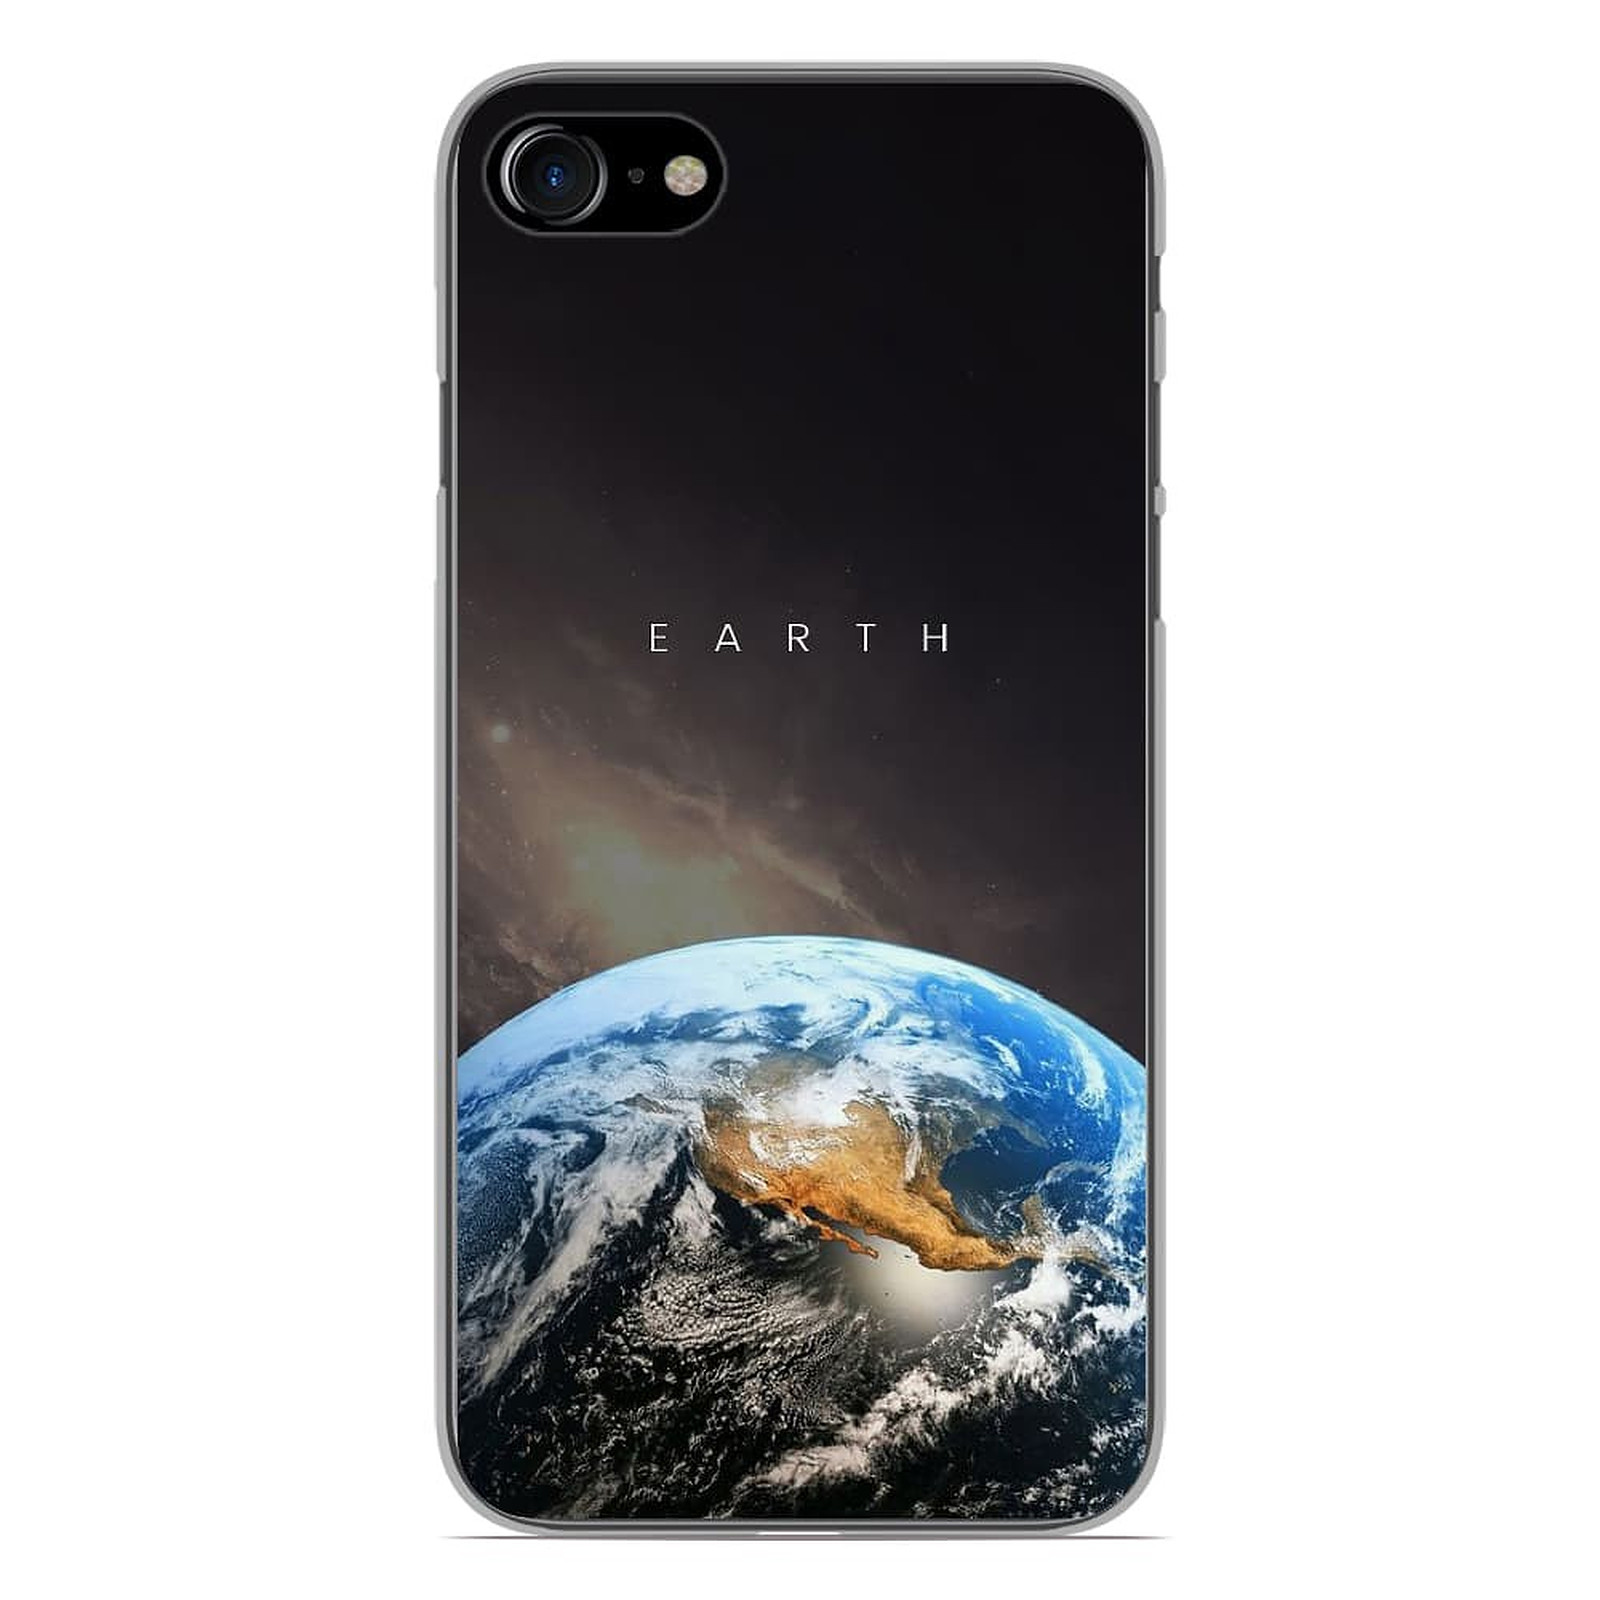 1001 Coques Coque silicone gel Apple iPhone 7 motif Earth - Coque telephone 1001Coques